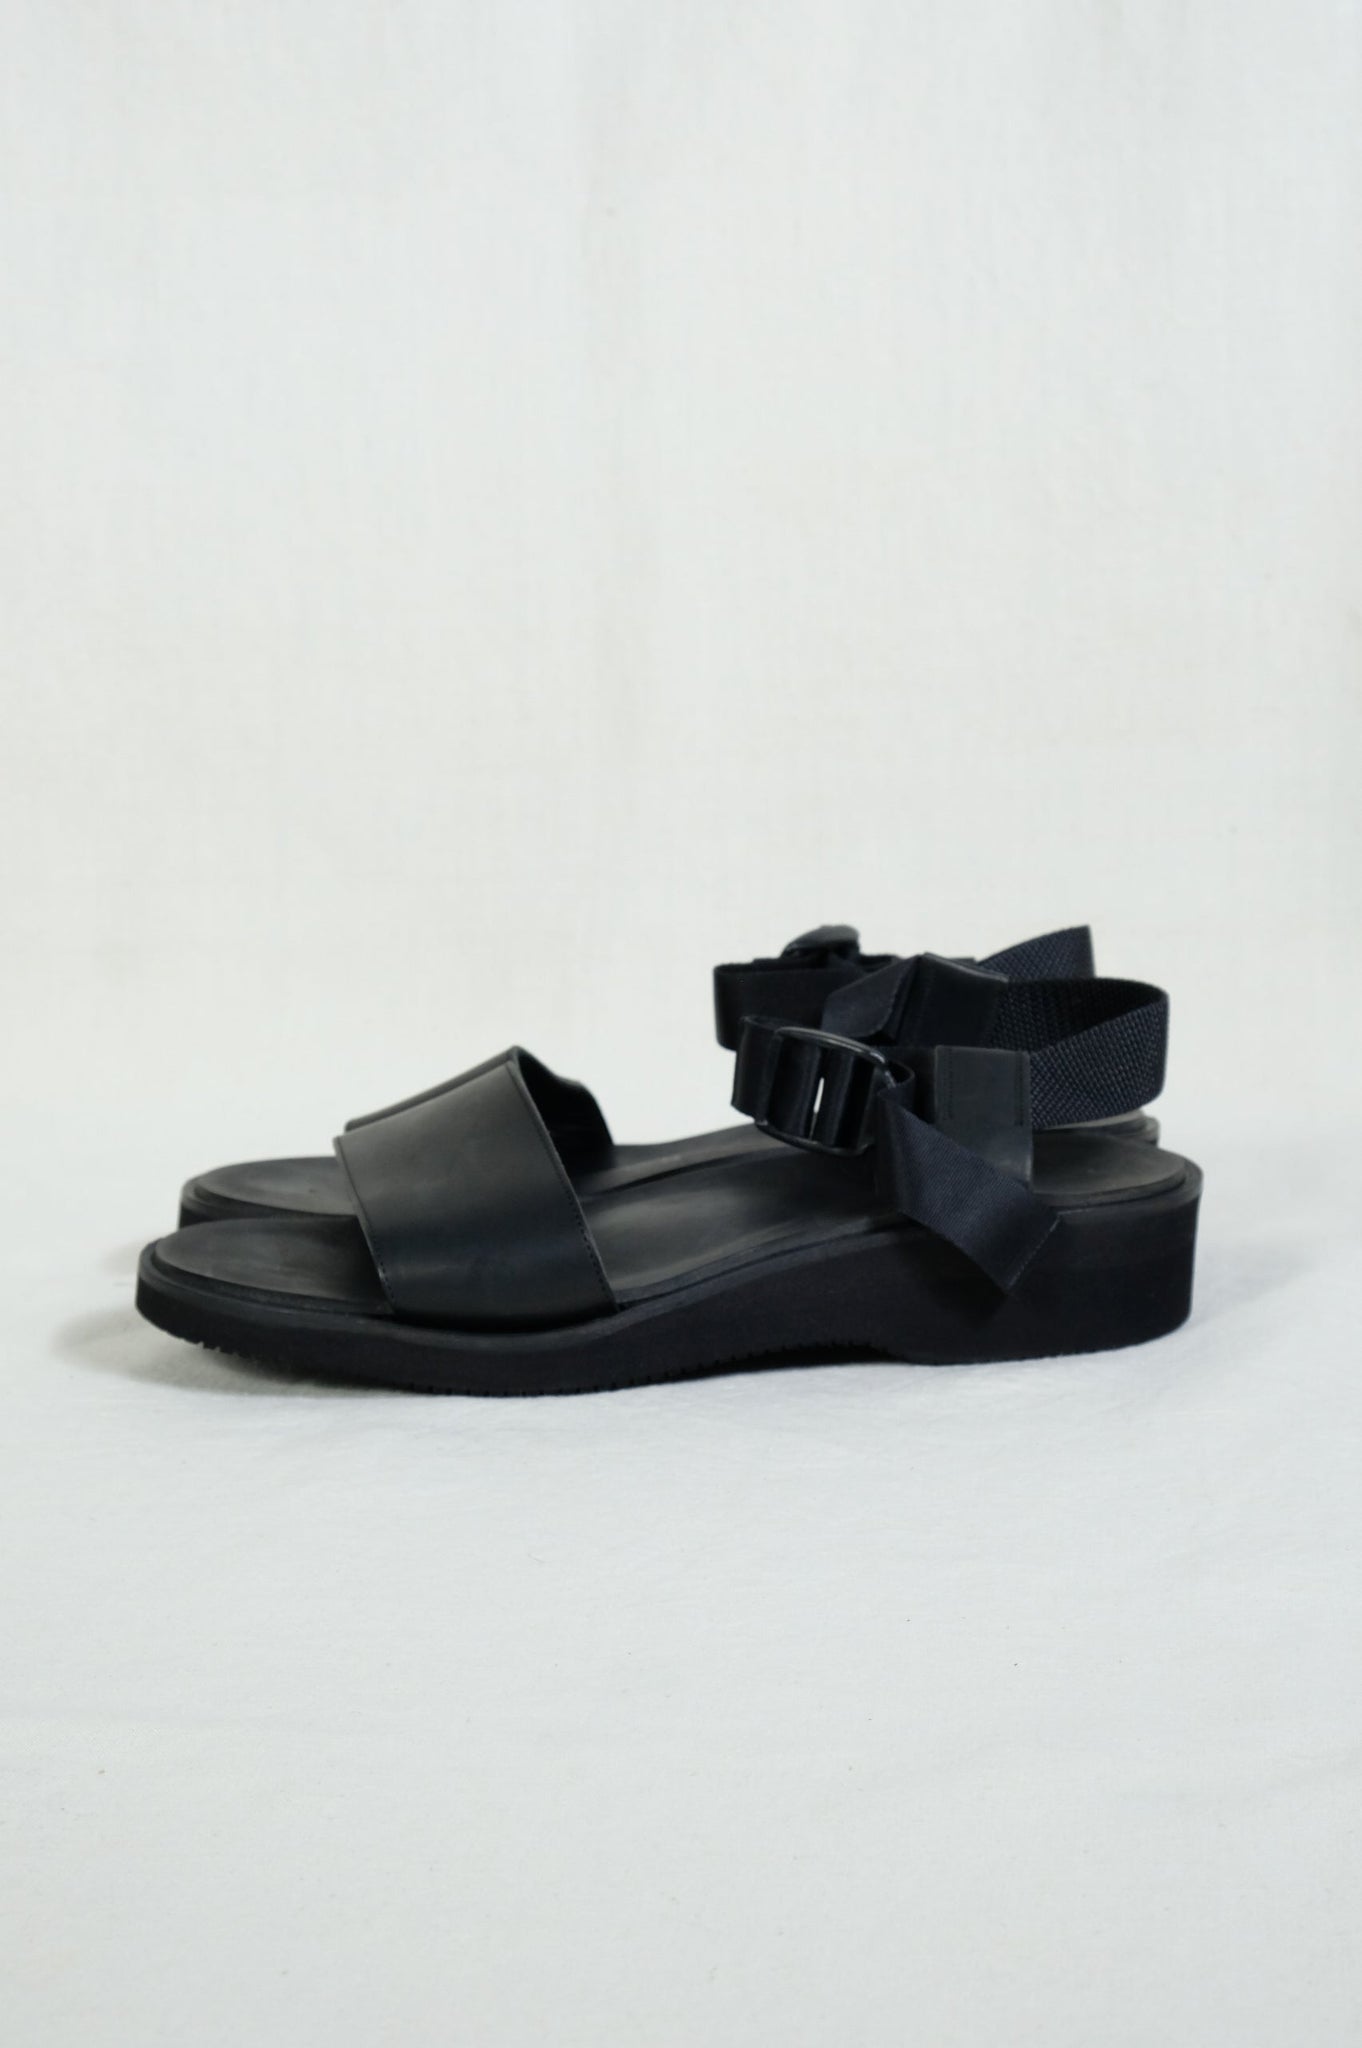 FOOTWORKS "LEATHER SANDAL/SMOOTH LEATHER"